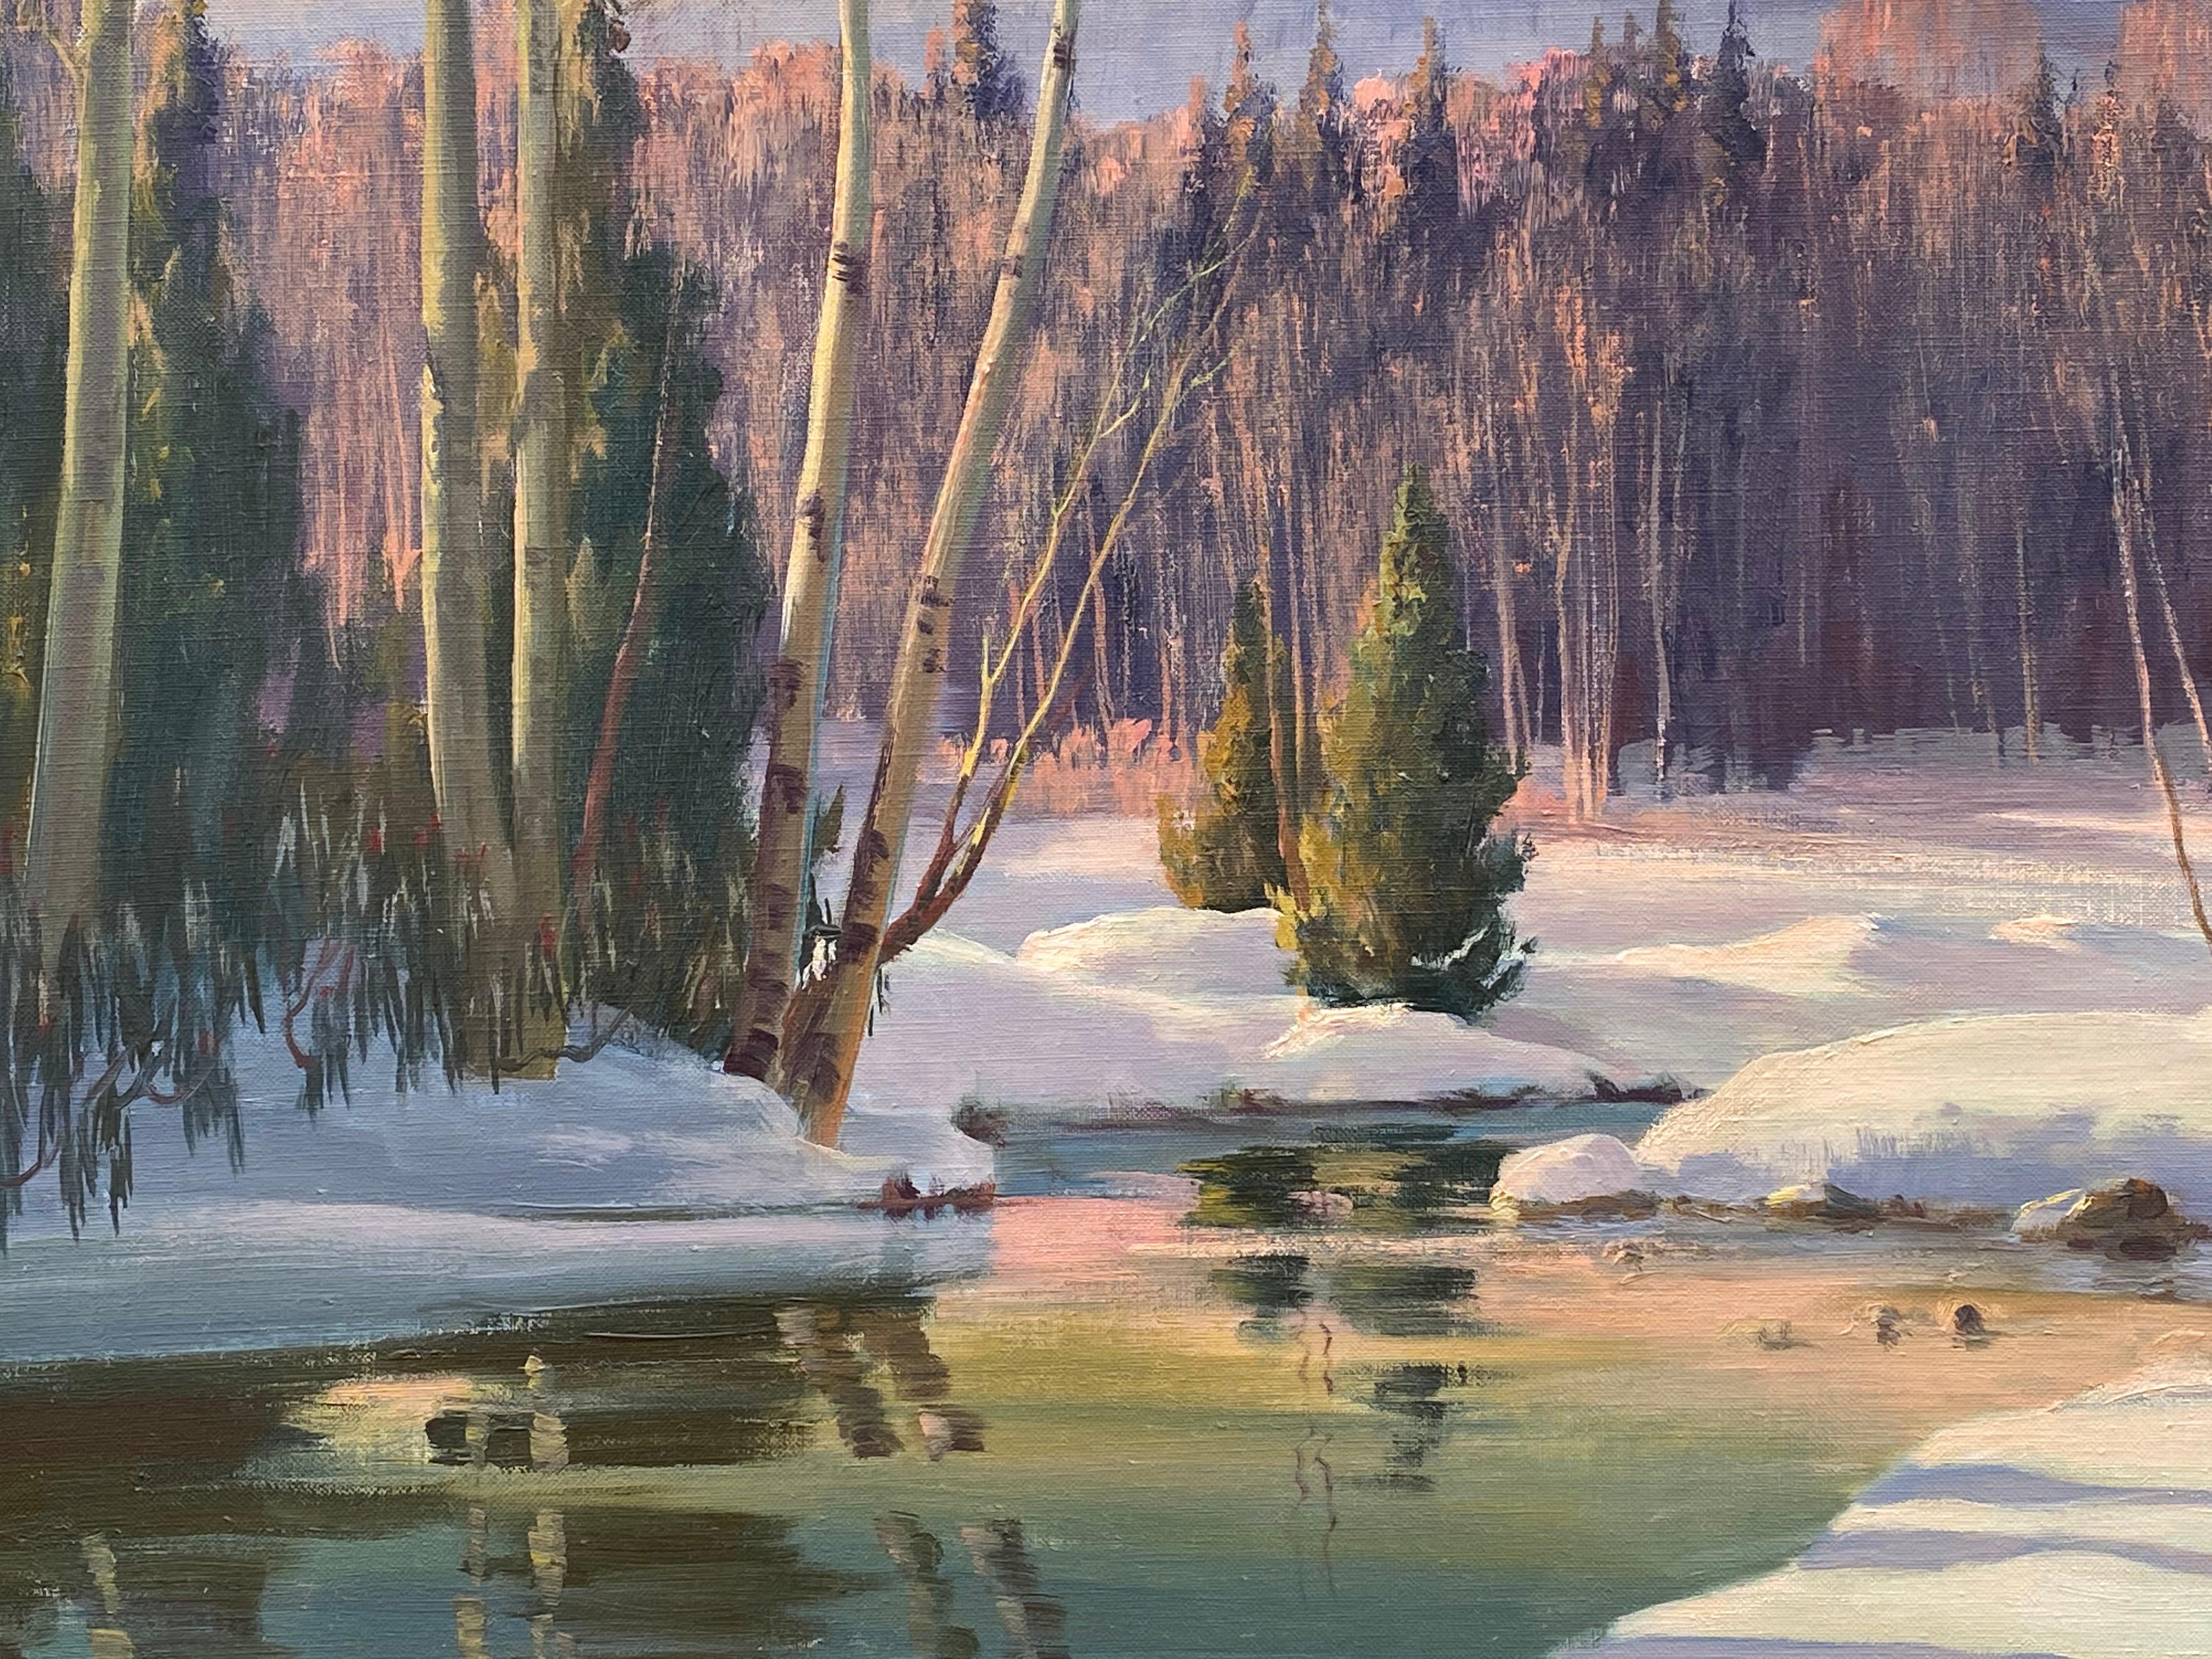 “Winter’s Hills and Streams” - Post-Impressionist Painting by Edna Palmer Engelhardt